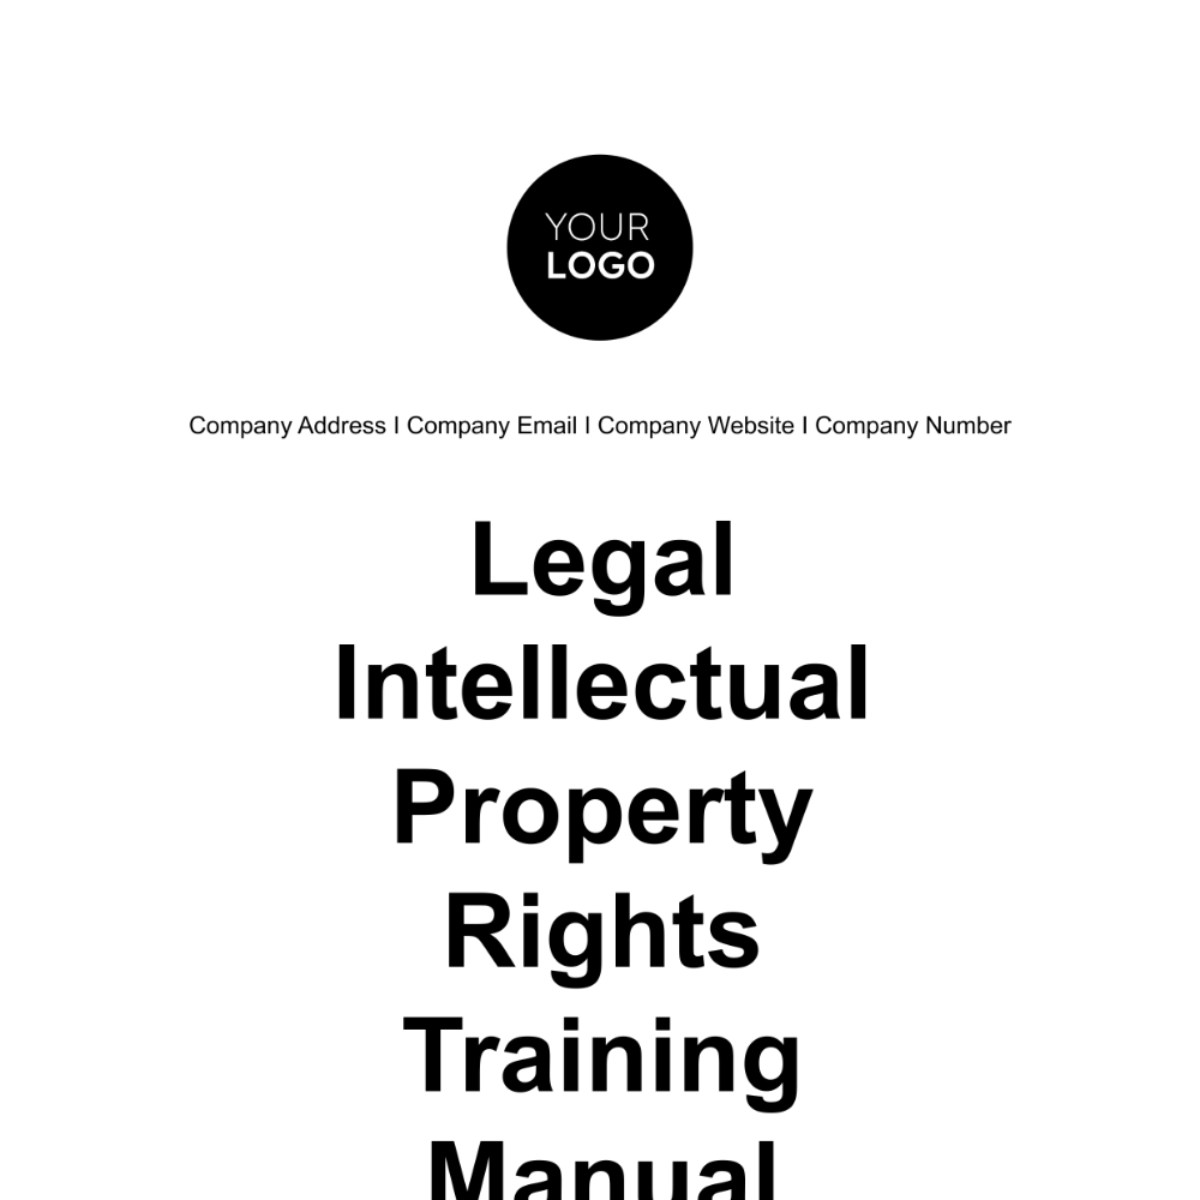 Free Legal Intellectual Property Rights Training Manual Template